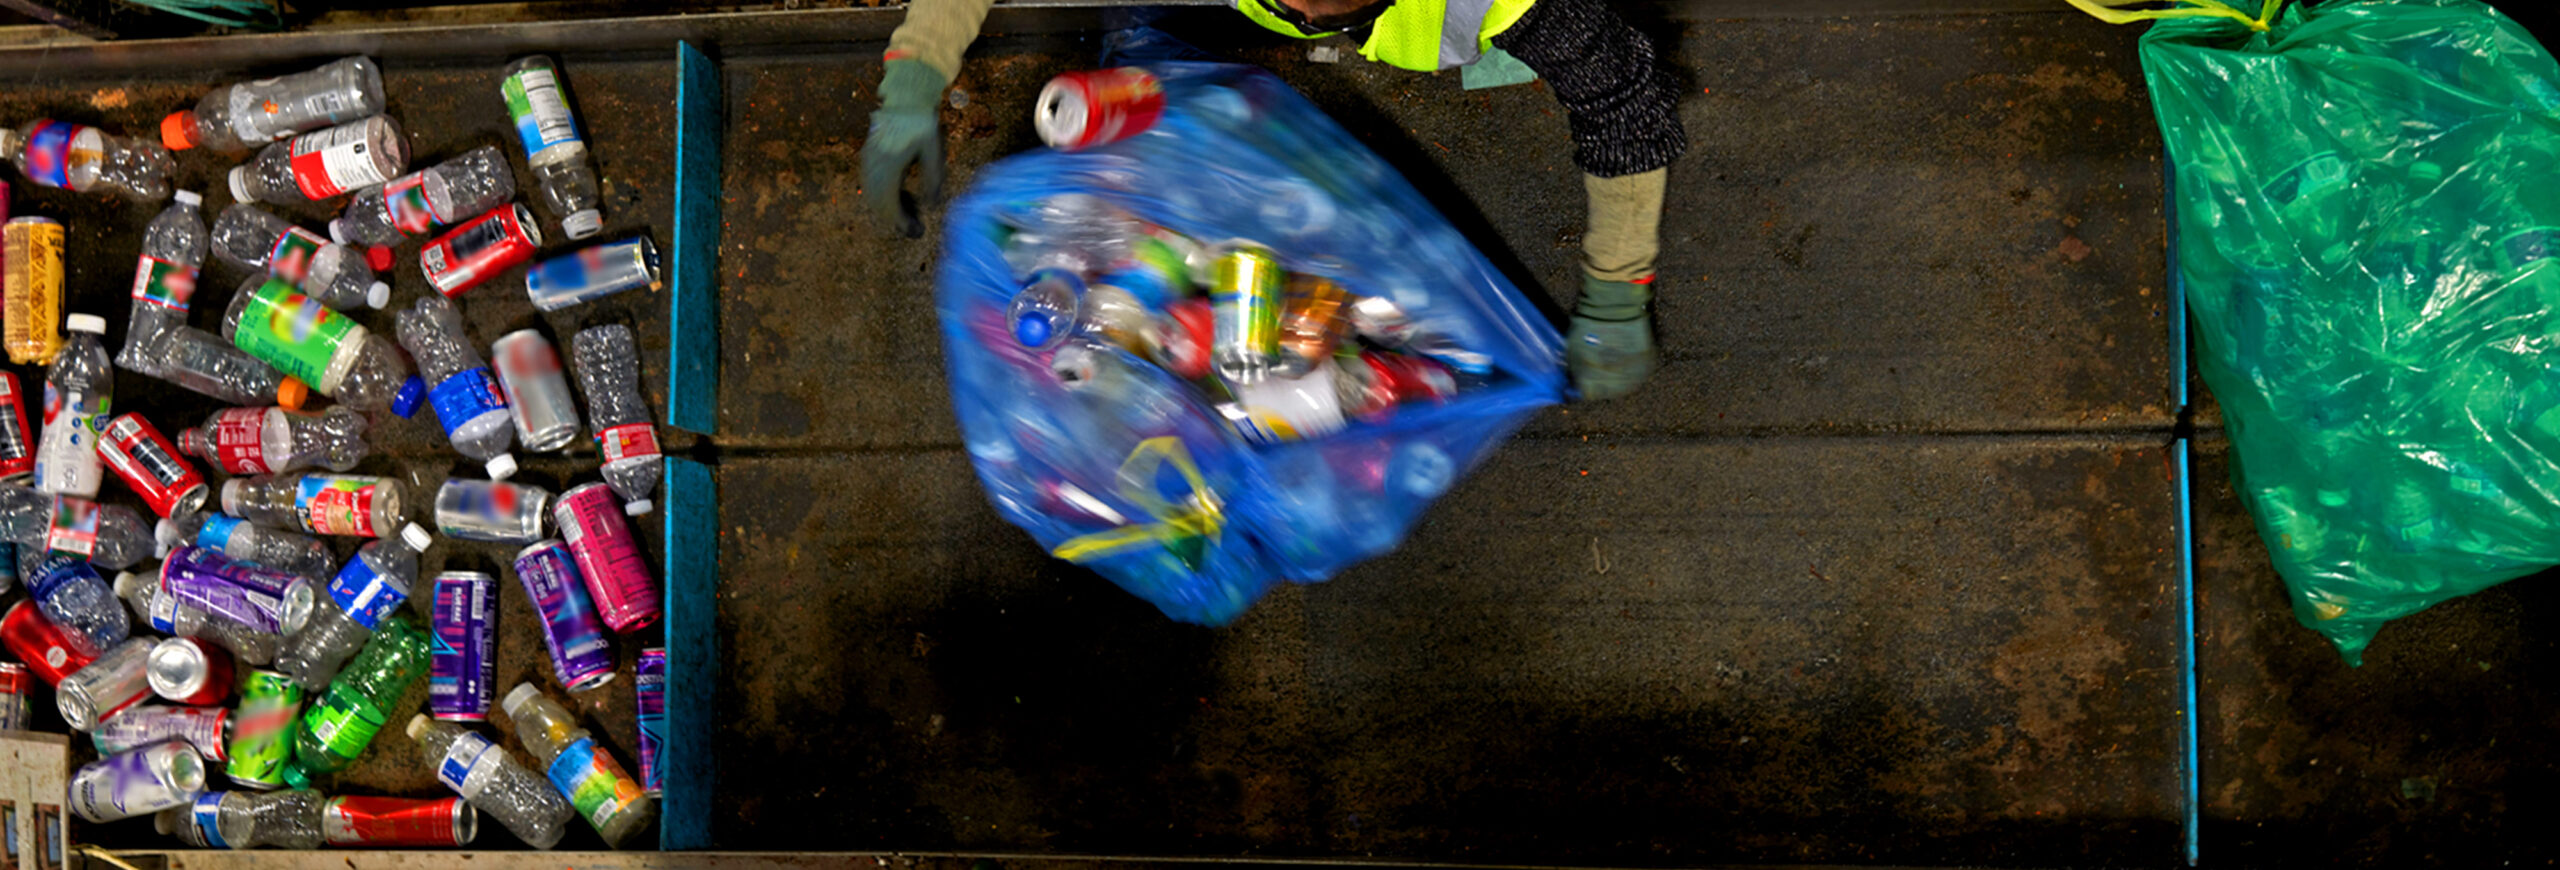 Bags of recyclable containers on a conveyor belt.